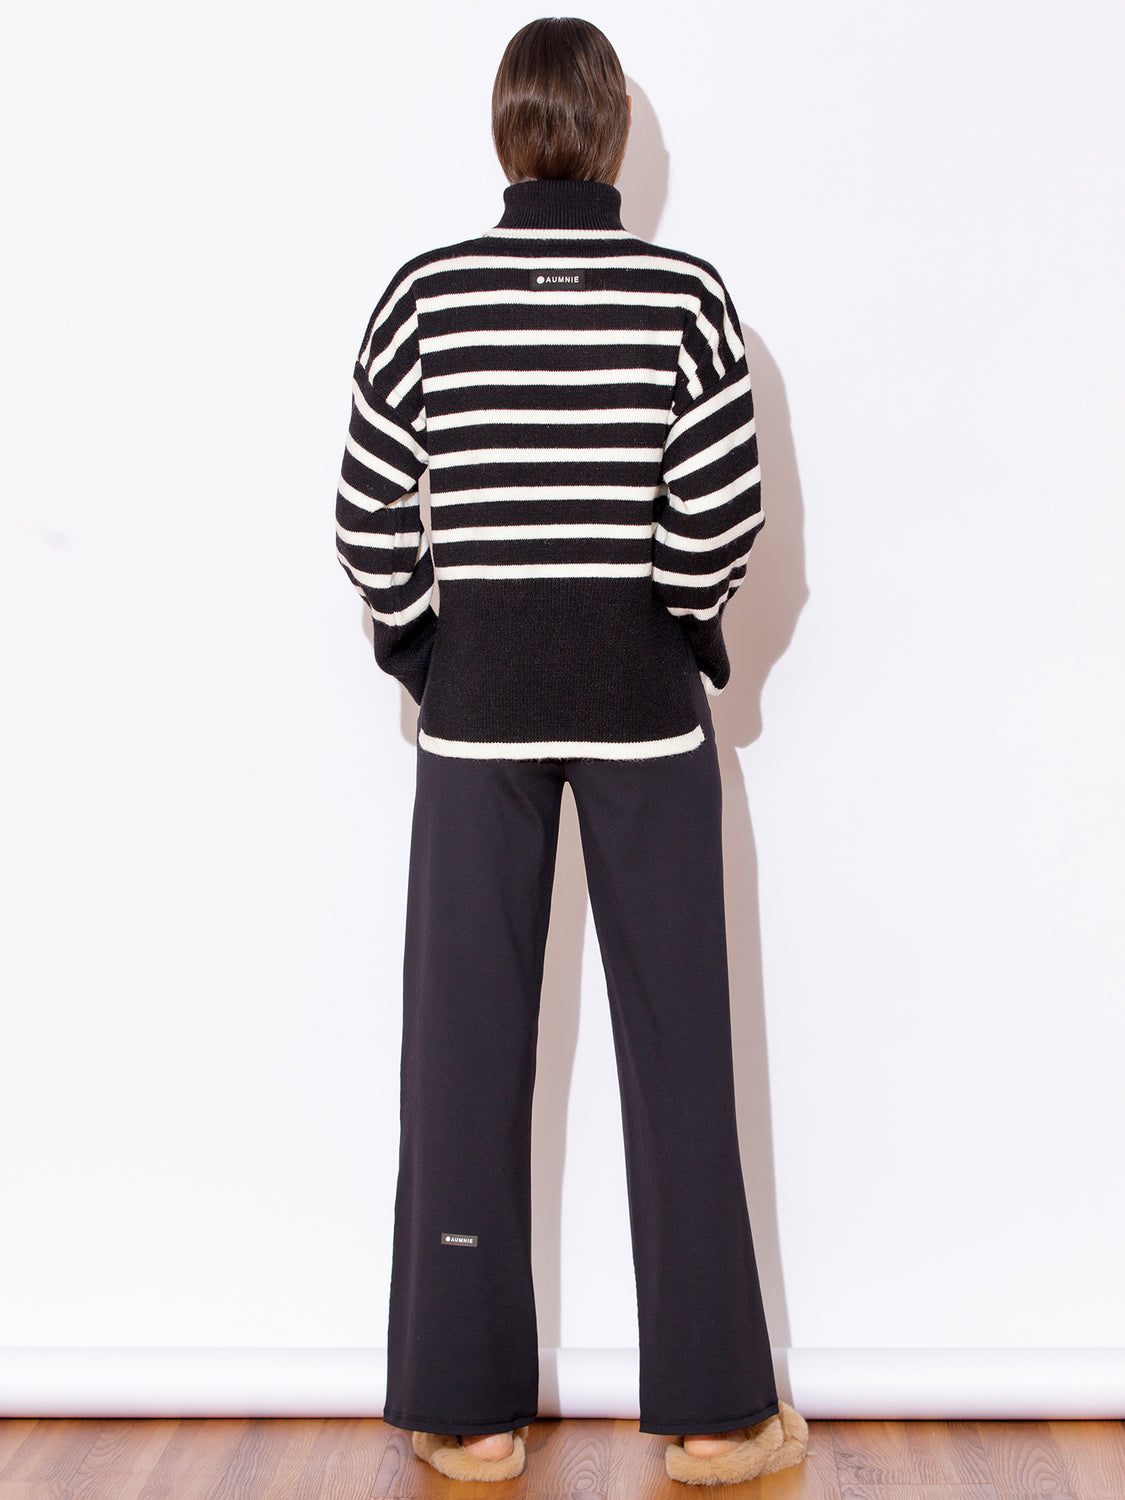 RELAXED STRIPED TURTLENECK SWEATER, BLACK/WHITE